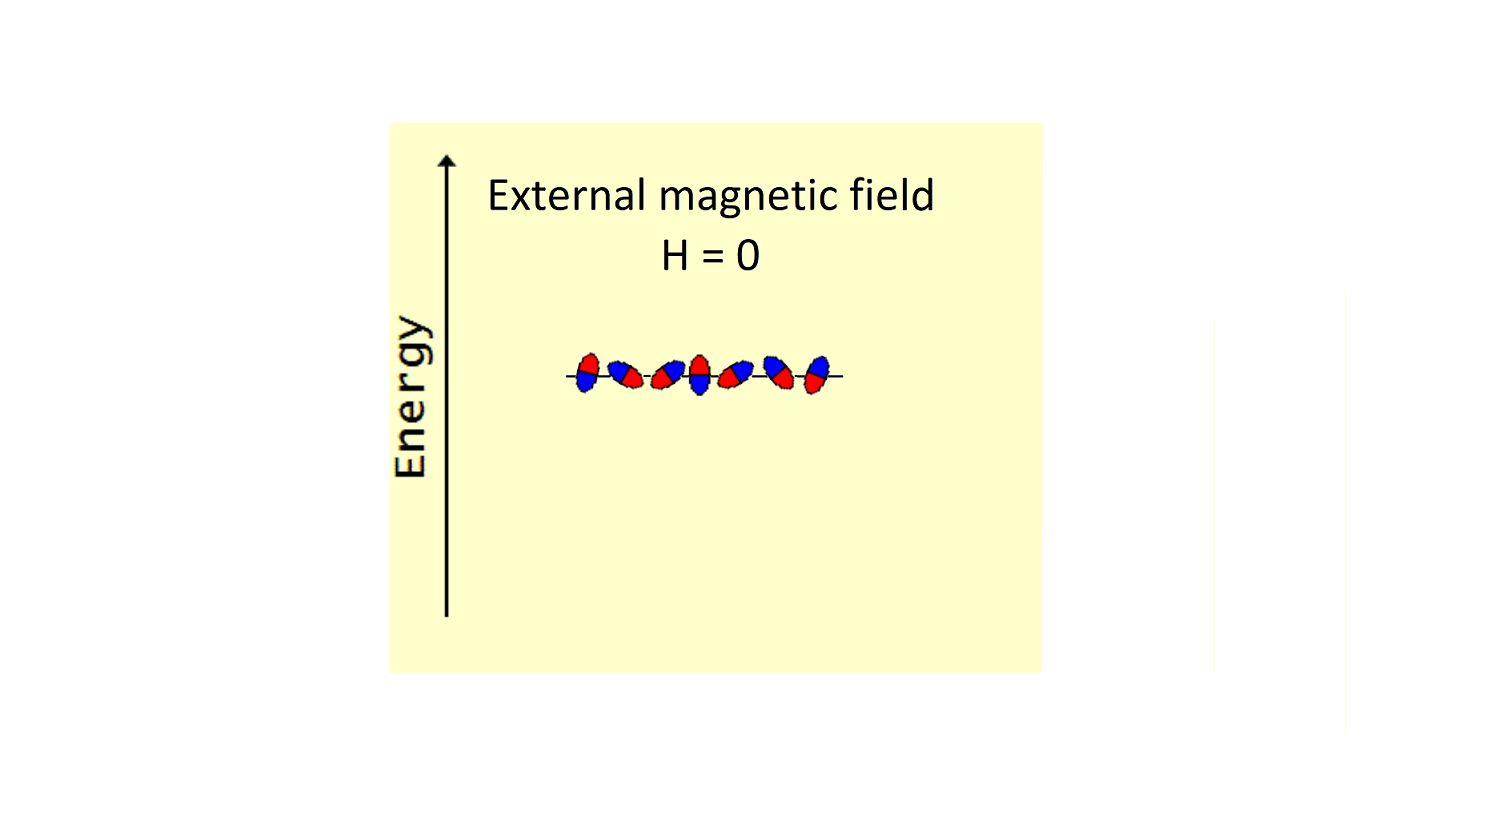 paramagnetic species when magnetic field equals zero